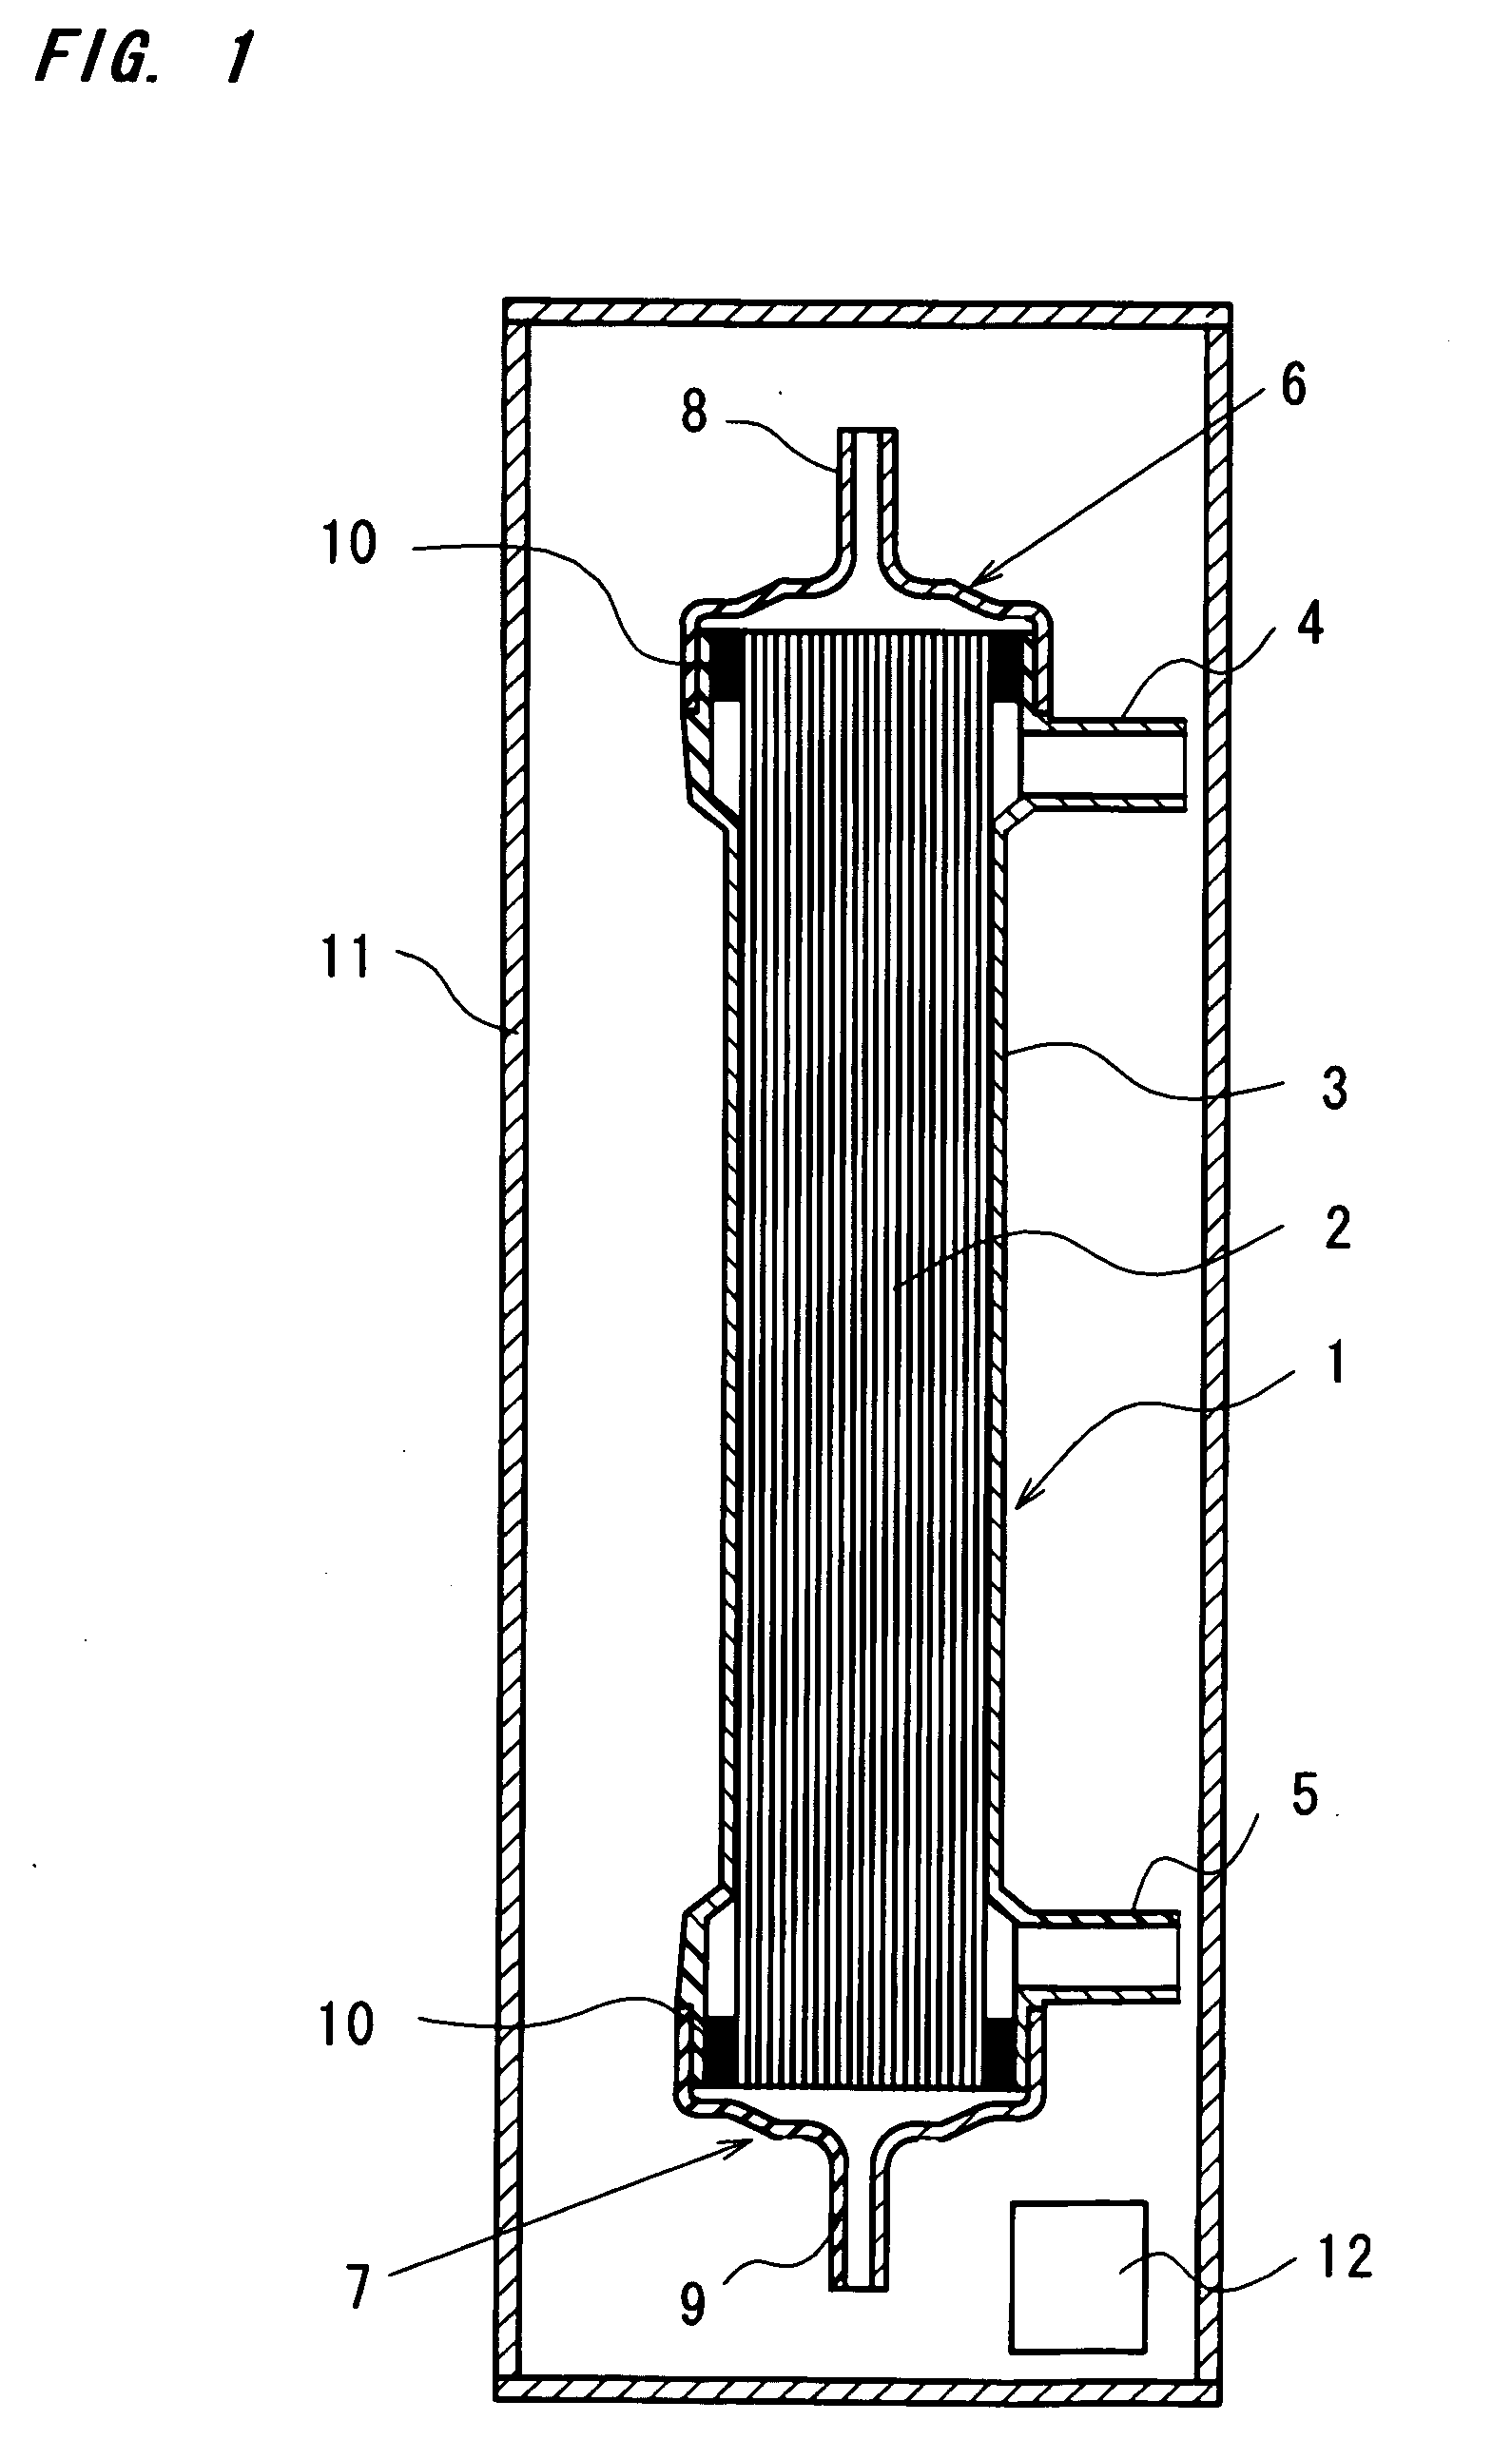 Hollow fiber blood-processing device and method for packaging and sterilizing such devices